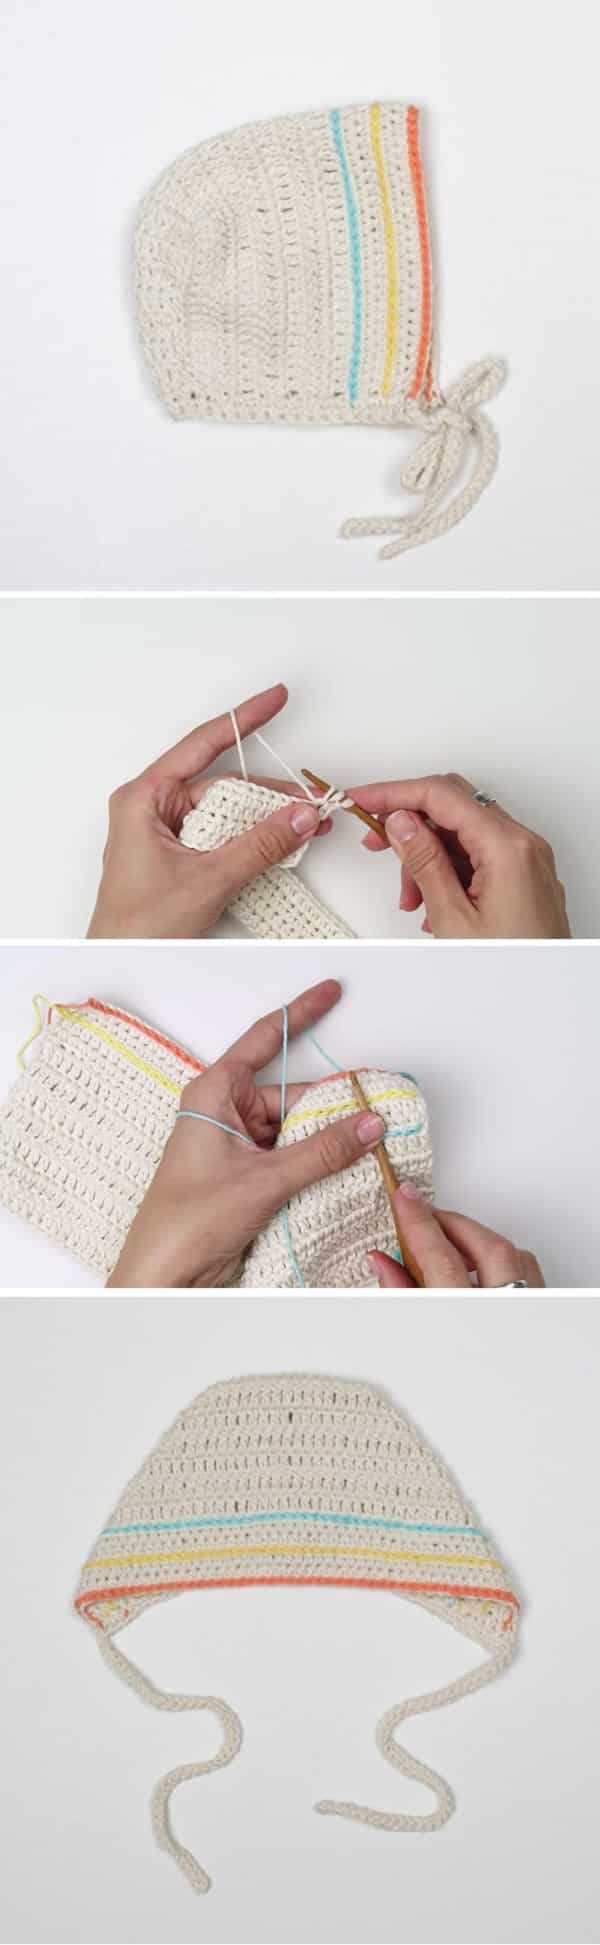 This is a super easy and fast step by step tutorial that will teach you how to crochet baby bonnet.